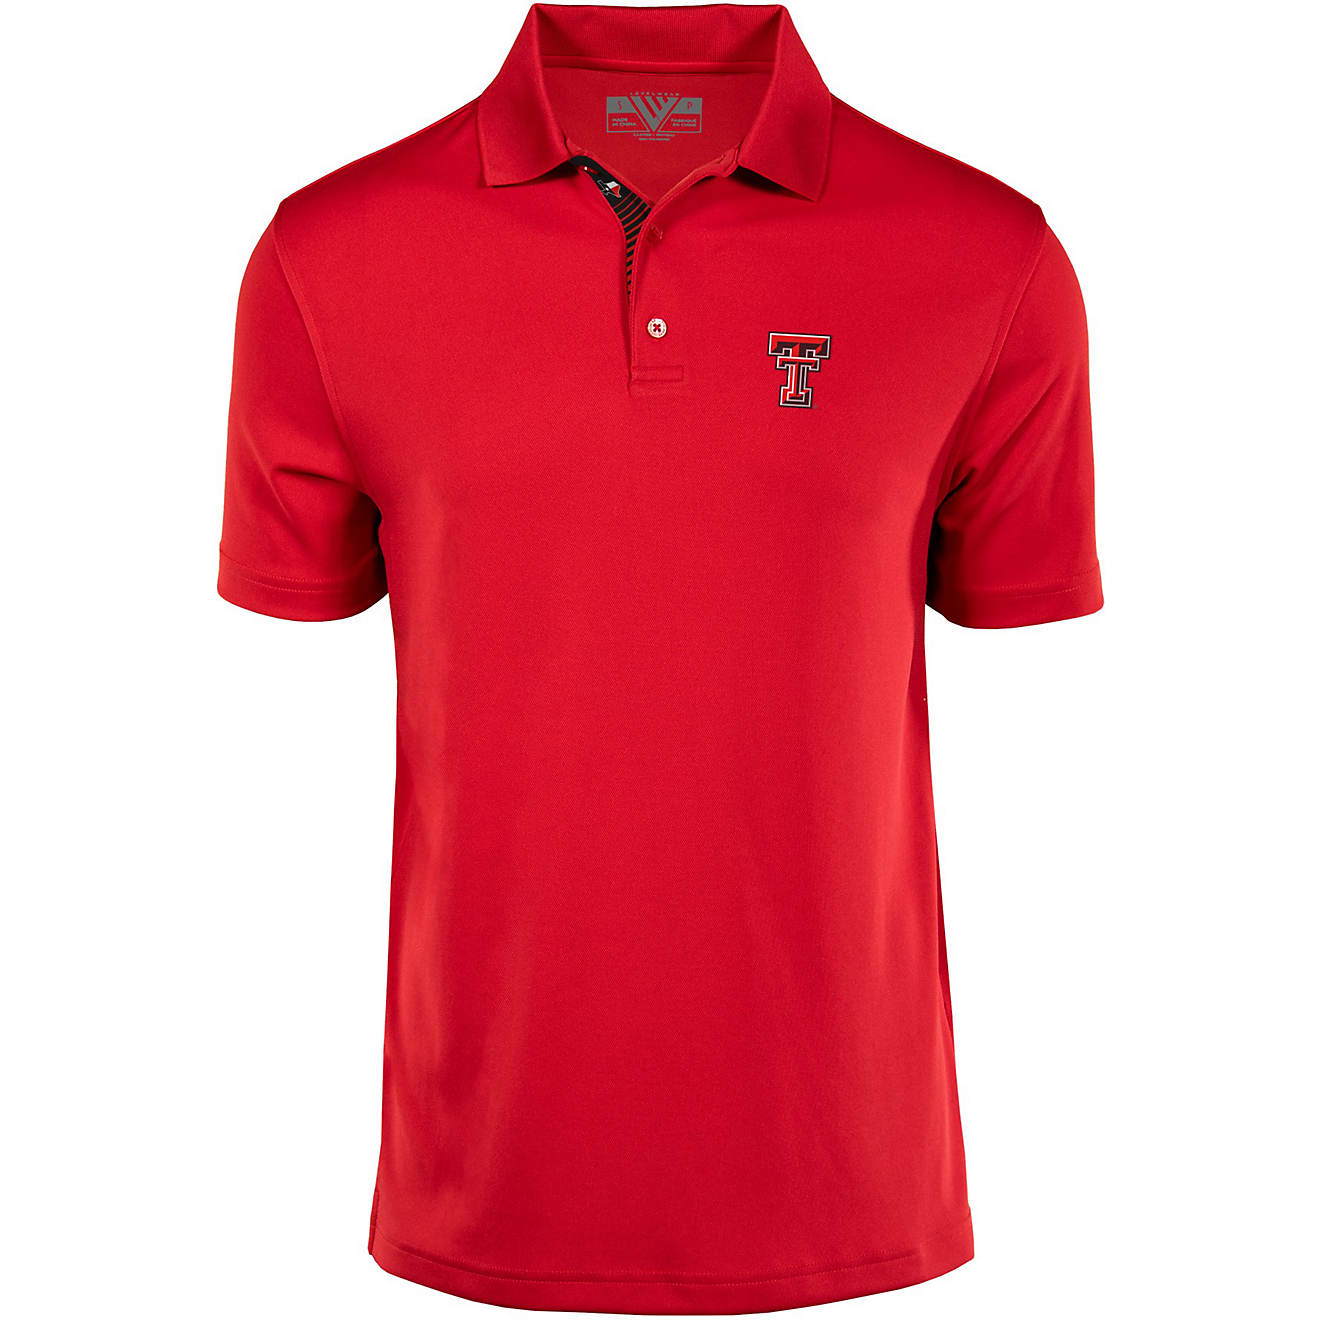 Levelwear Men's Texas Tech University Omaha Cycle Polo Shirt                                                                     - view number 1